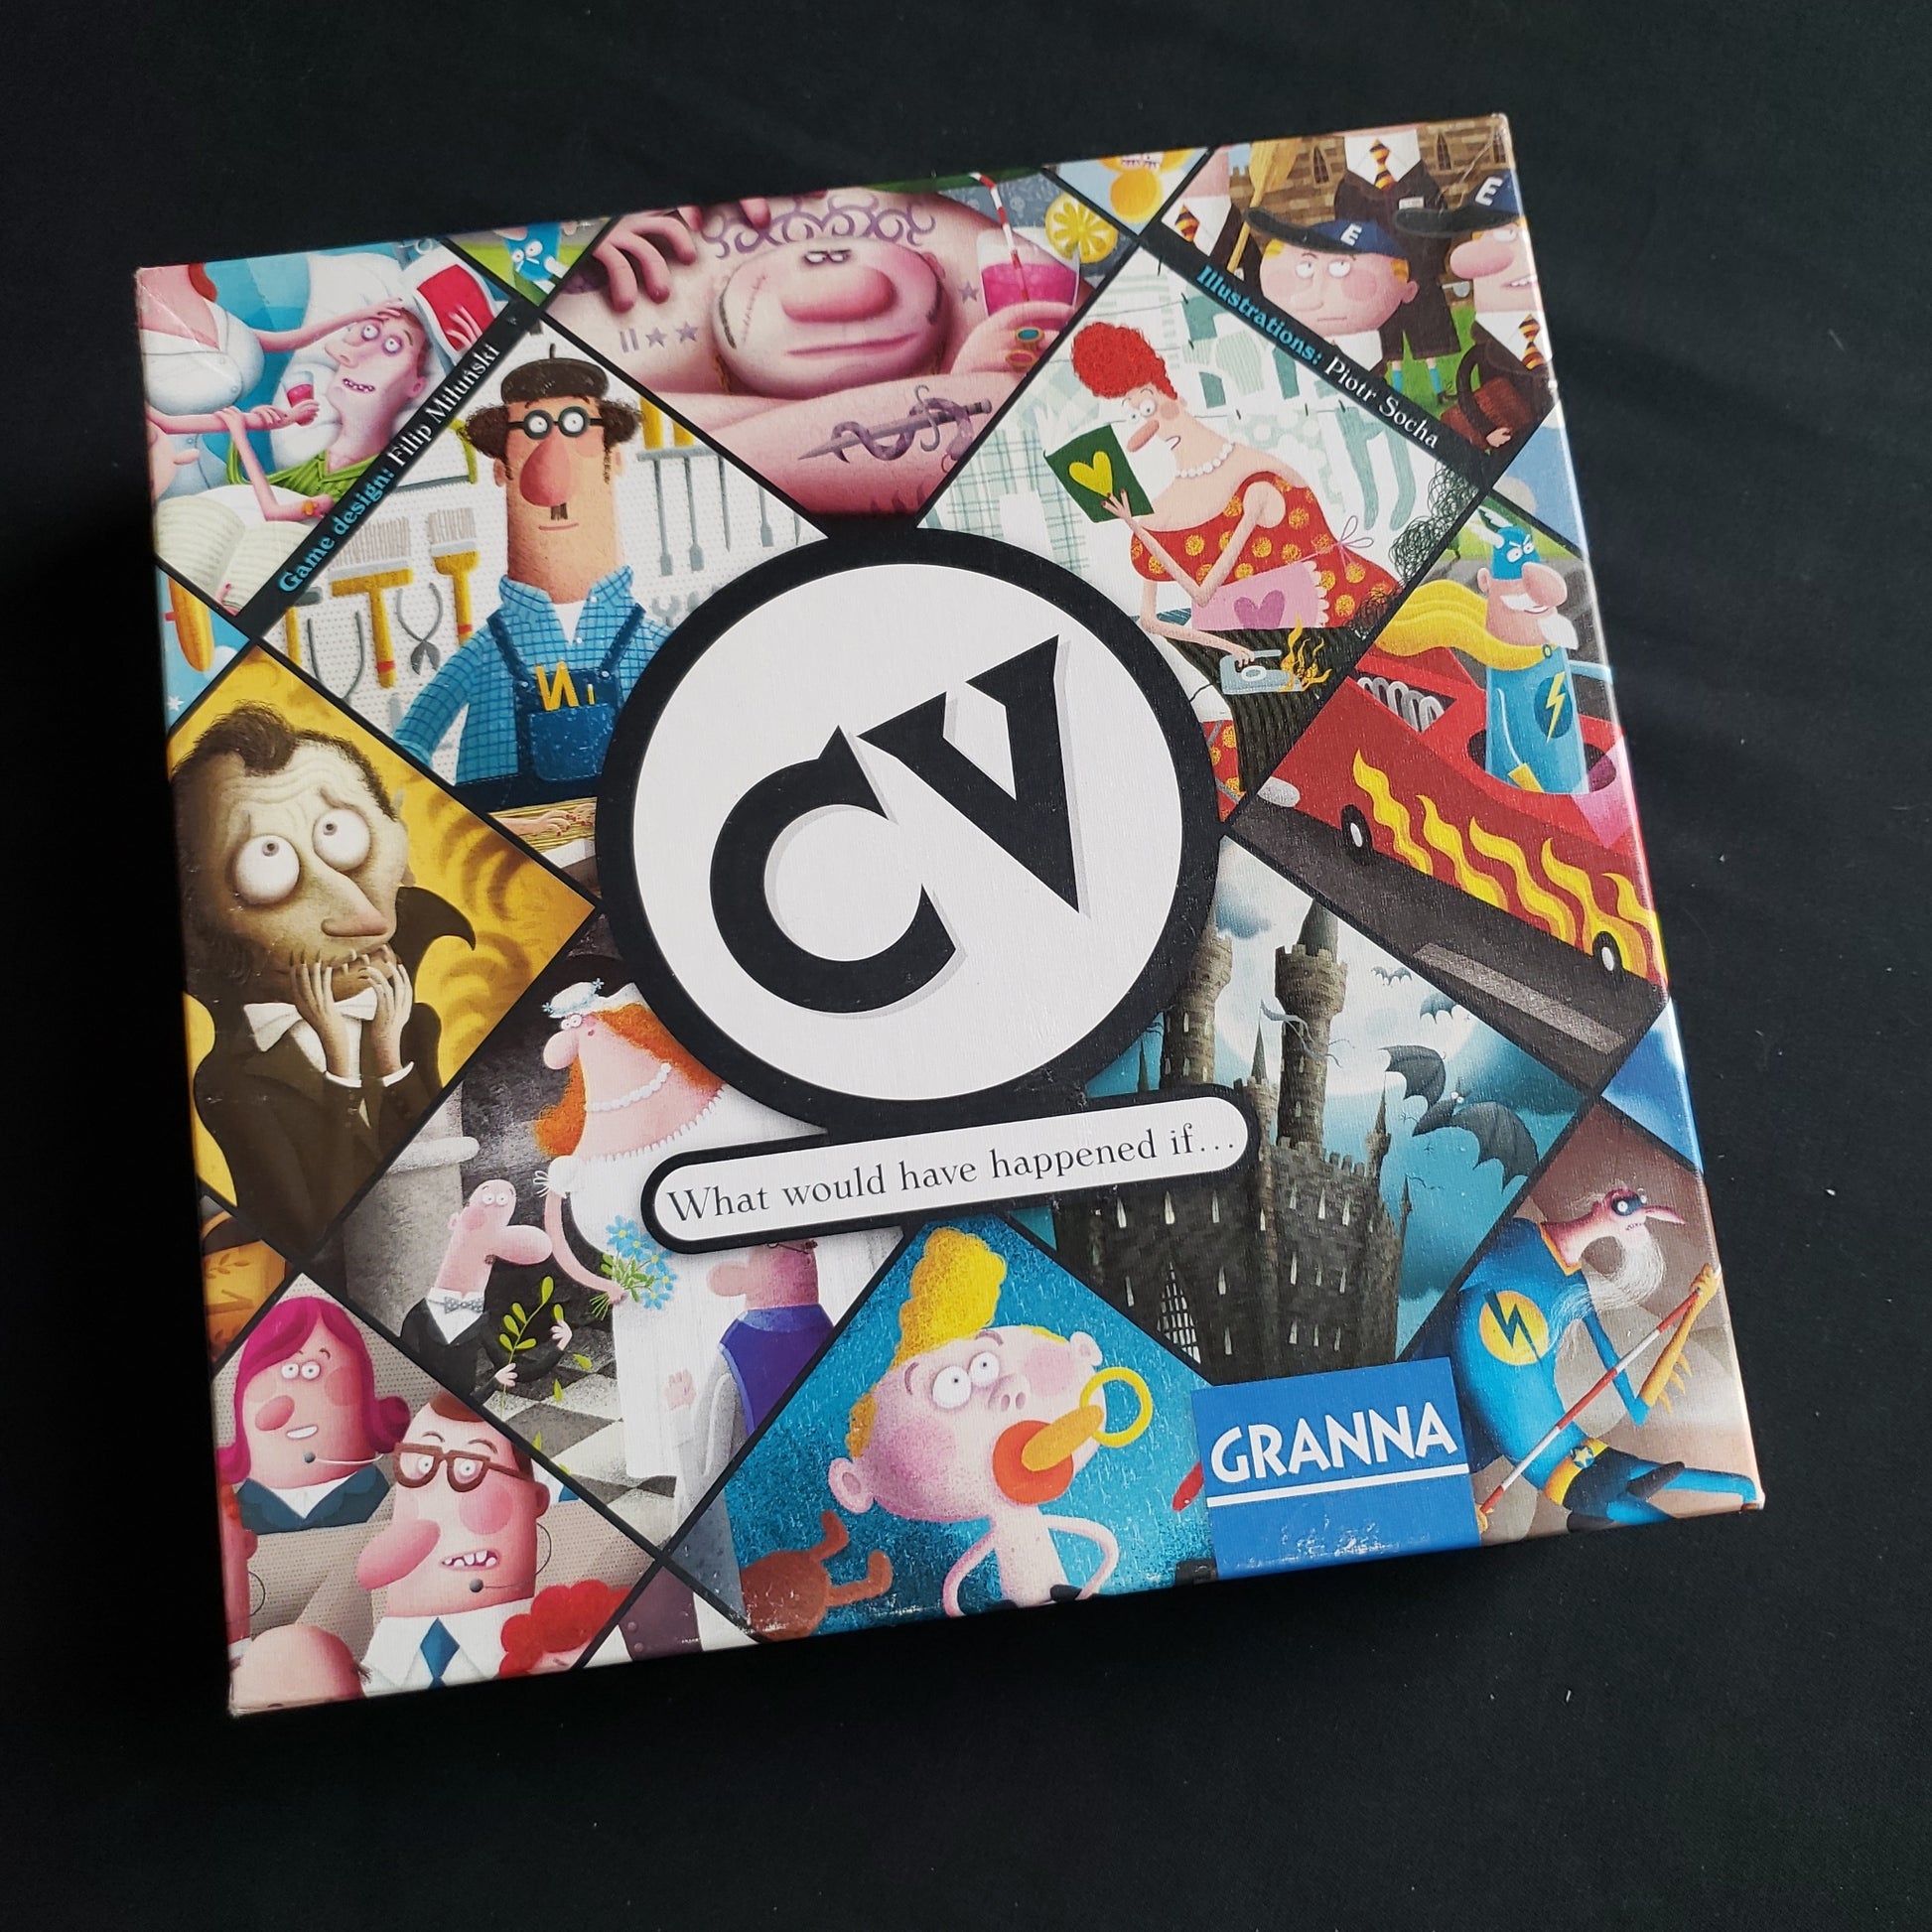 Image shows the front cover of the box of the CV board game